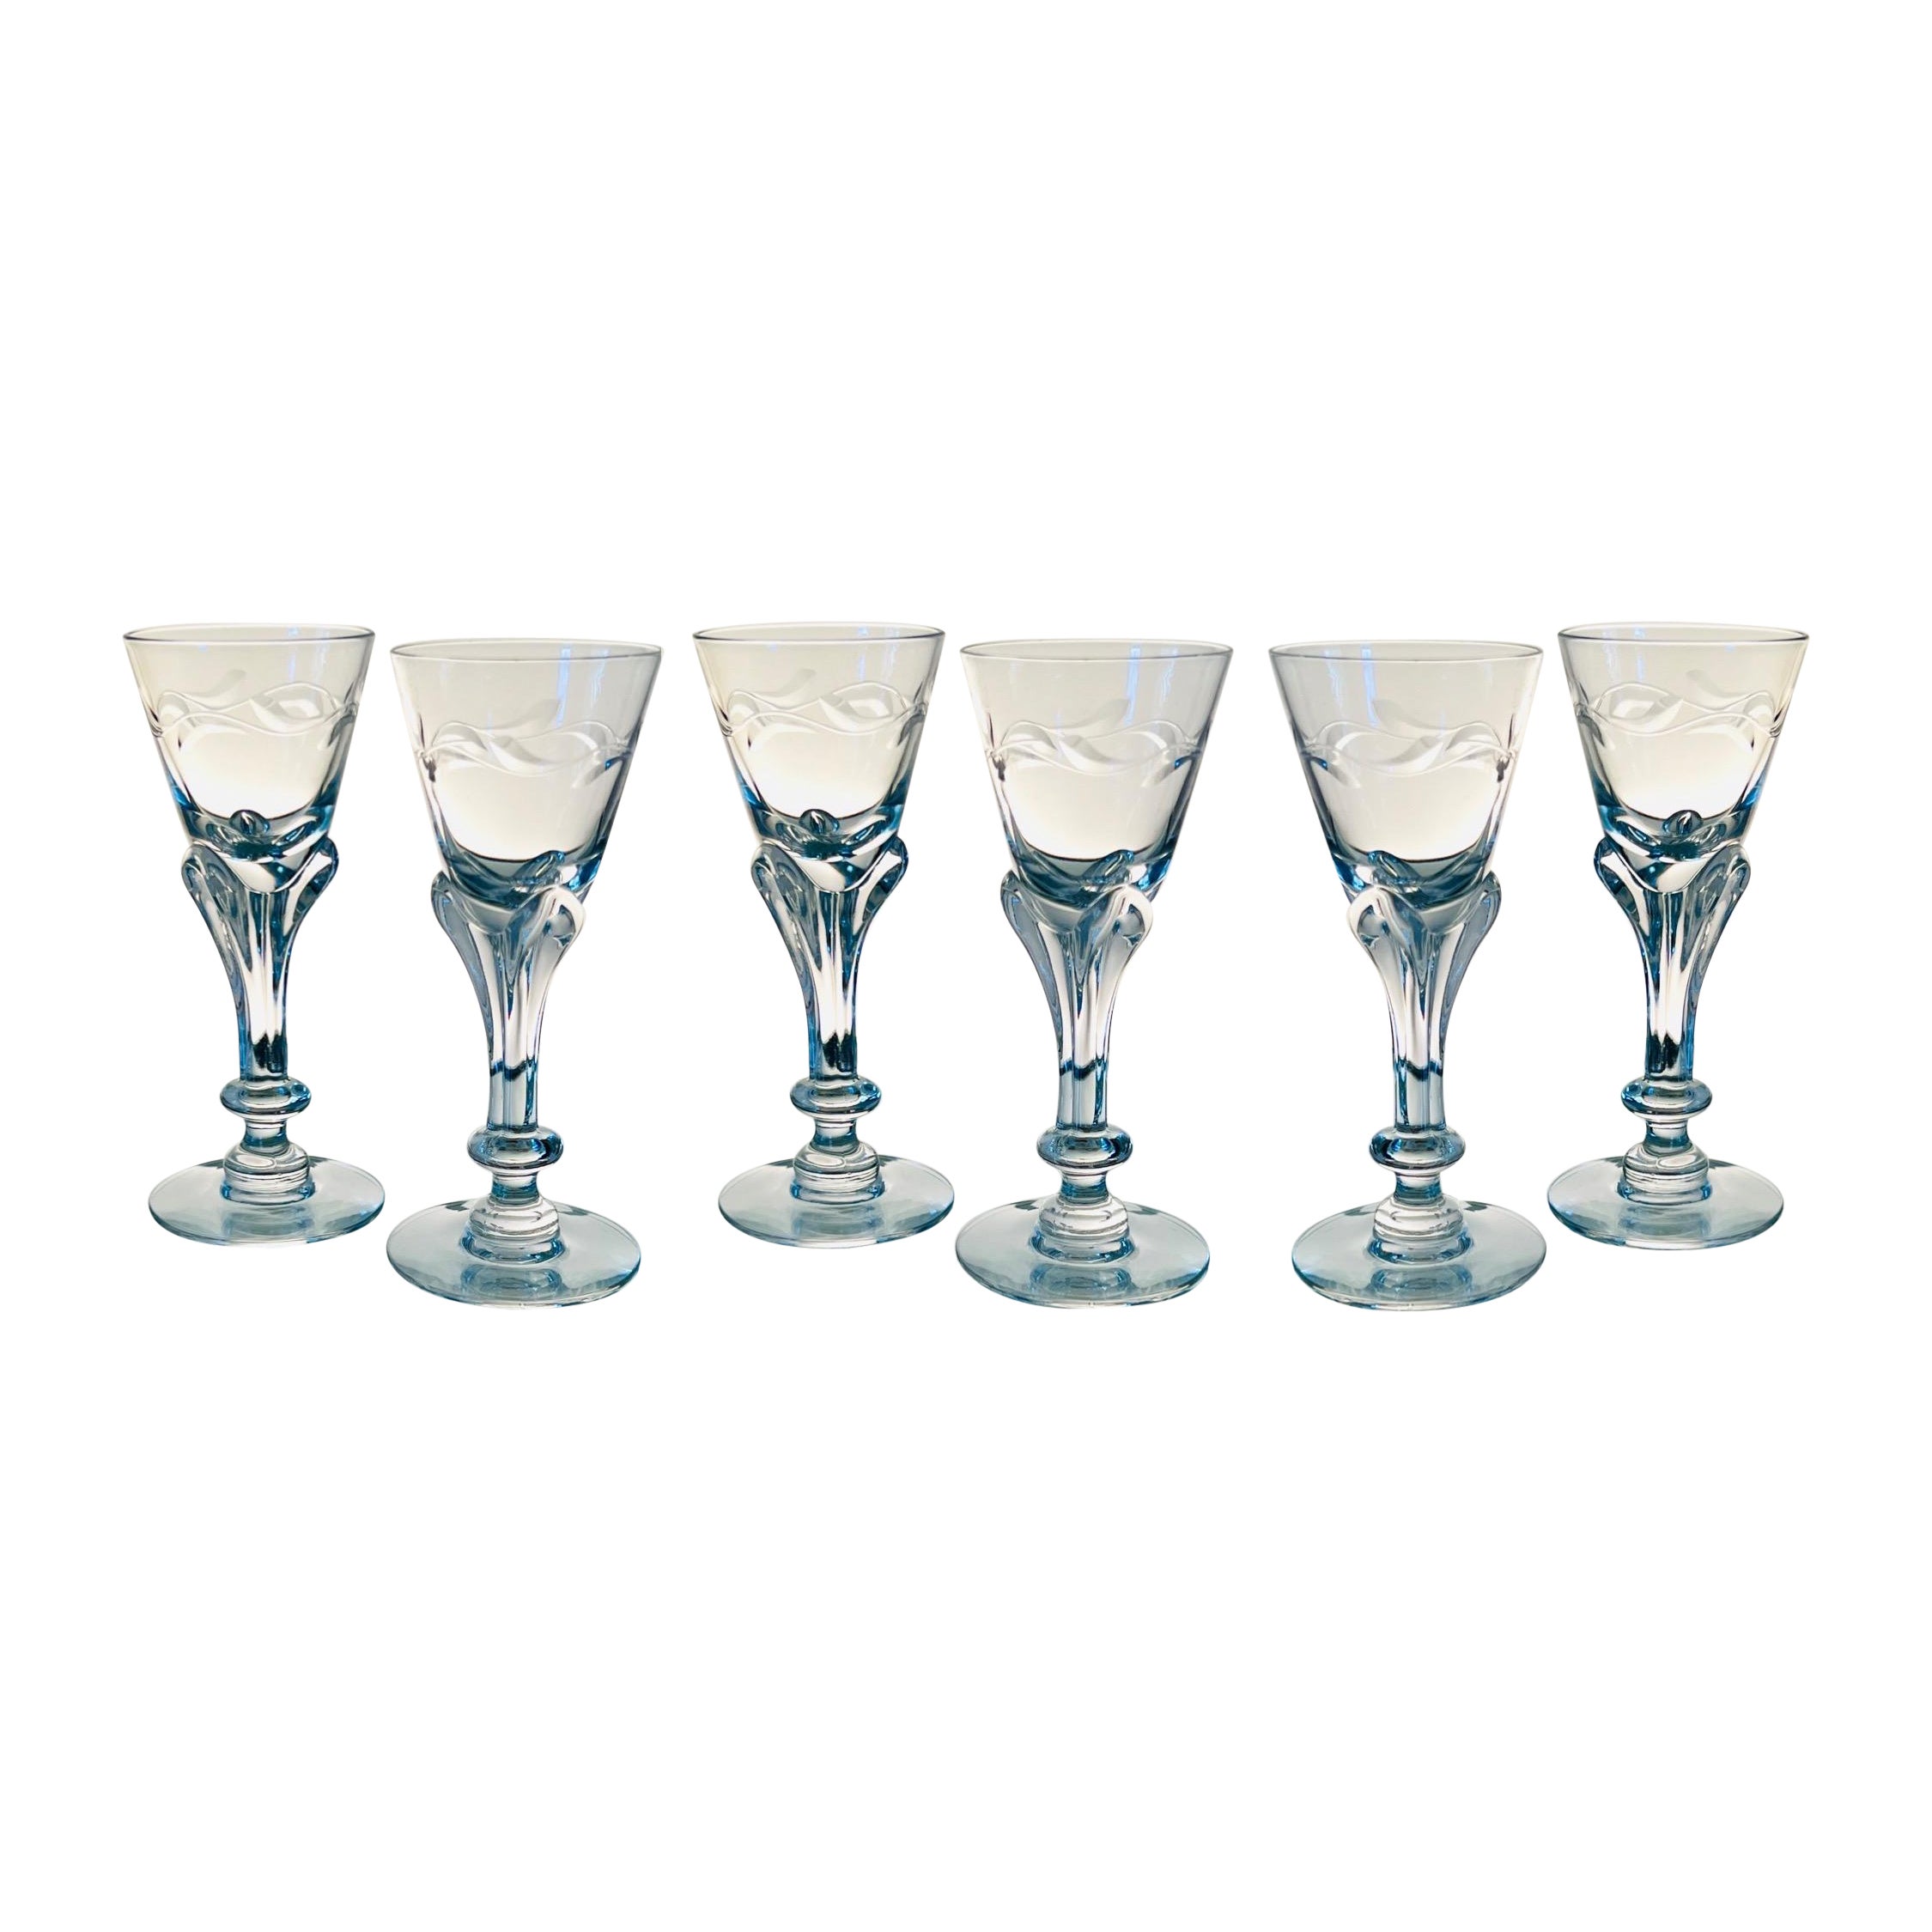 Art Nouveau Crystal Cordial Glasses by Tiffin Glass, Set of Ten